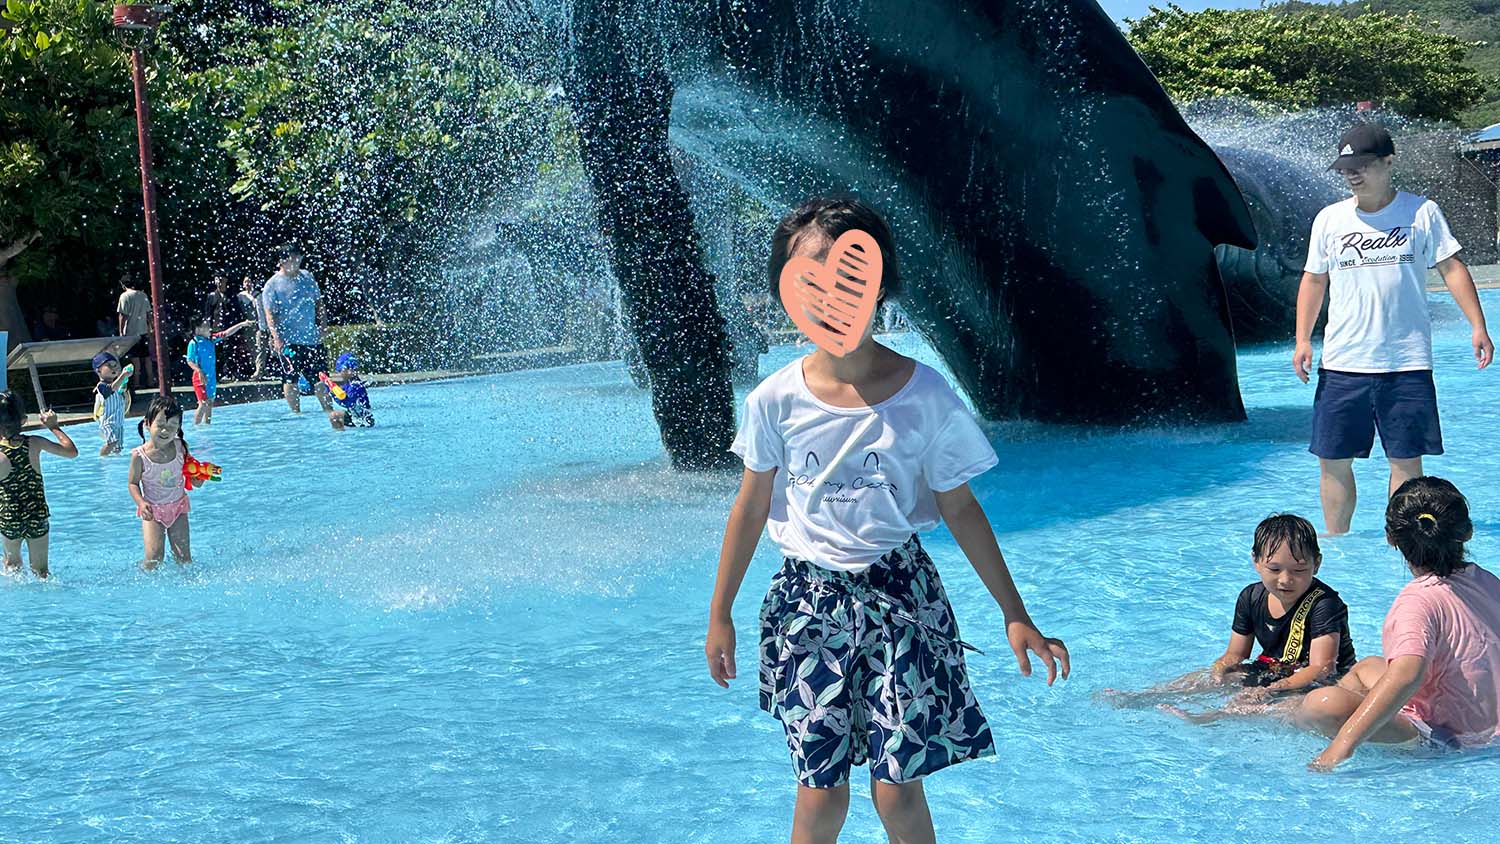 Little girl laughs in water at a water park